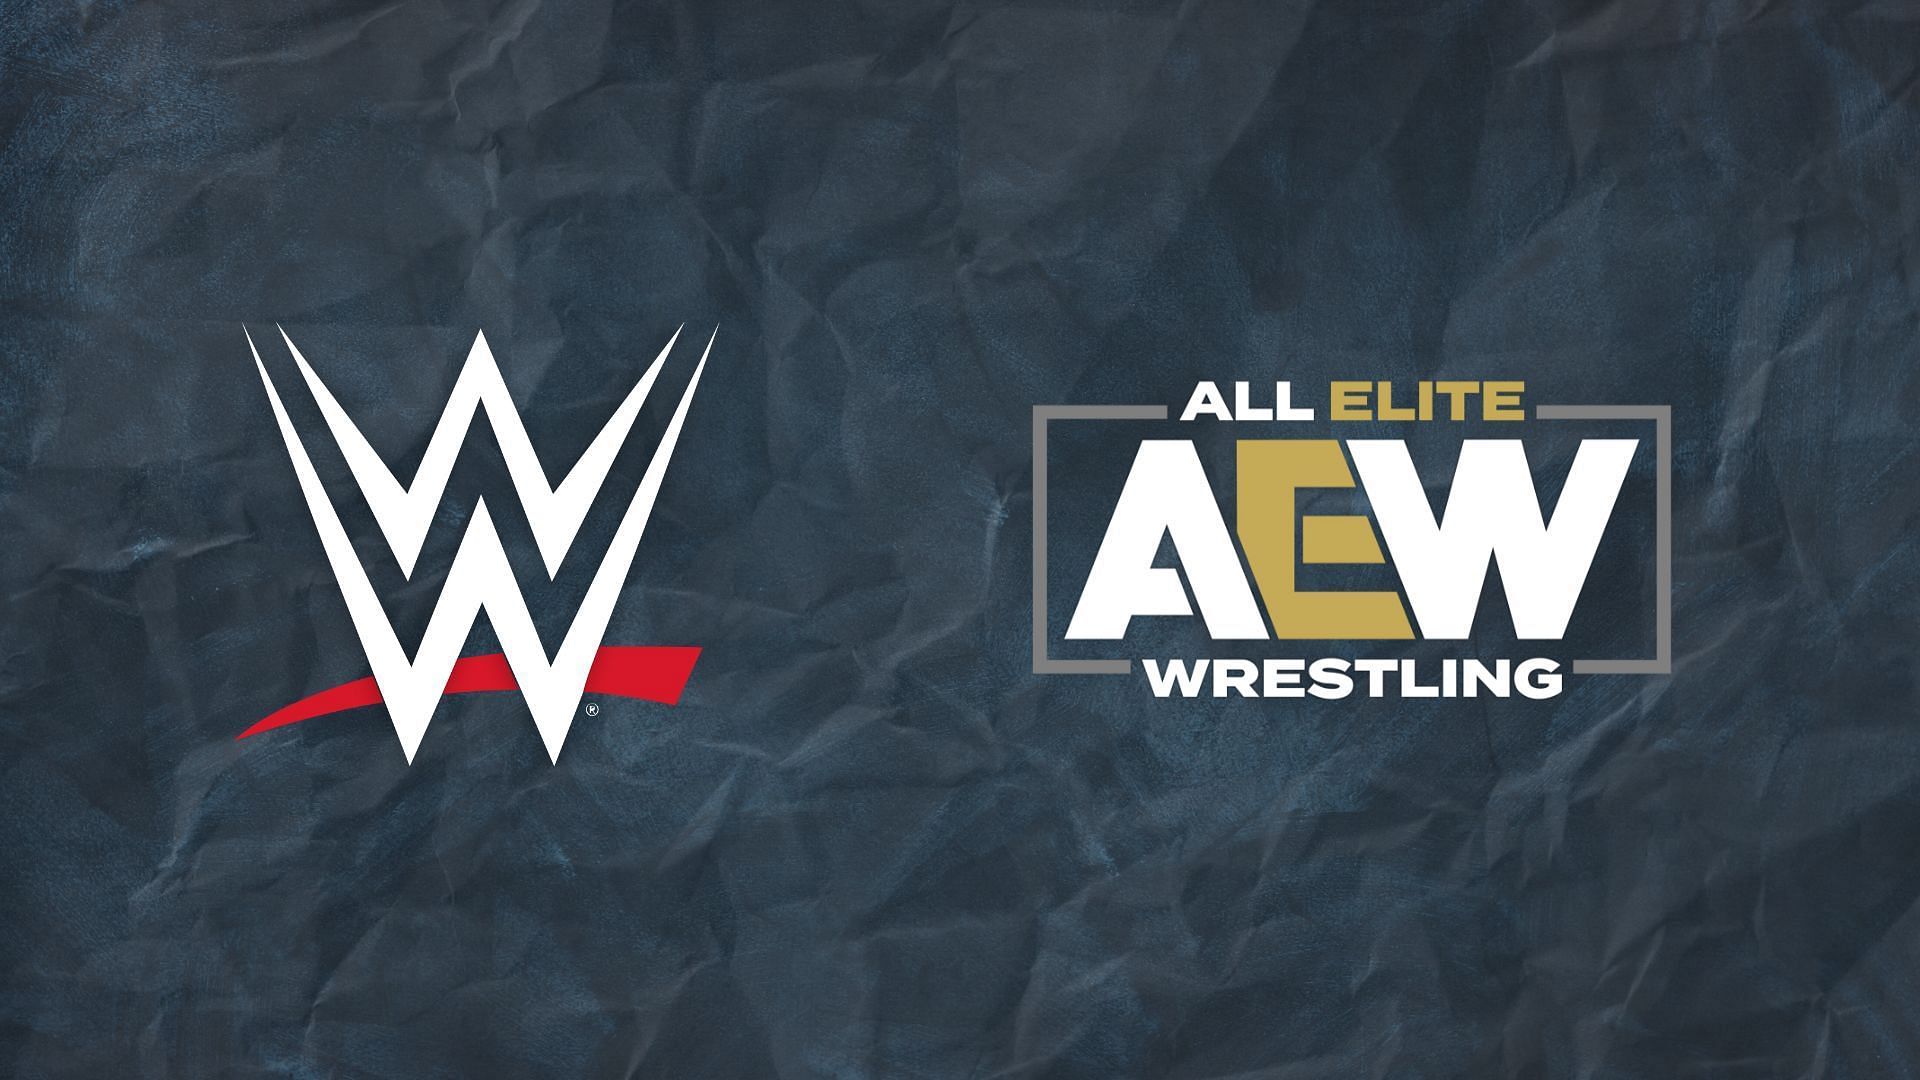 The Star joined All Elite Wrestling in May 2022